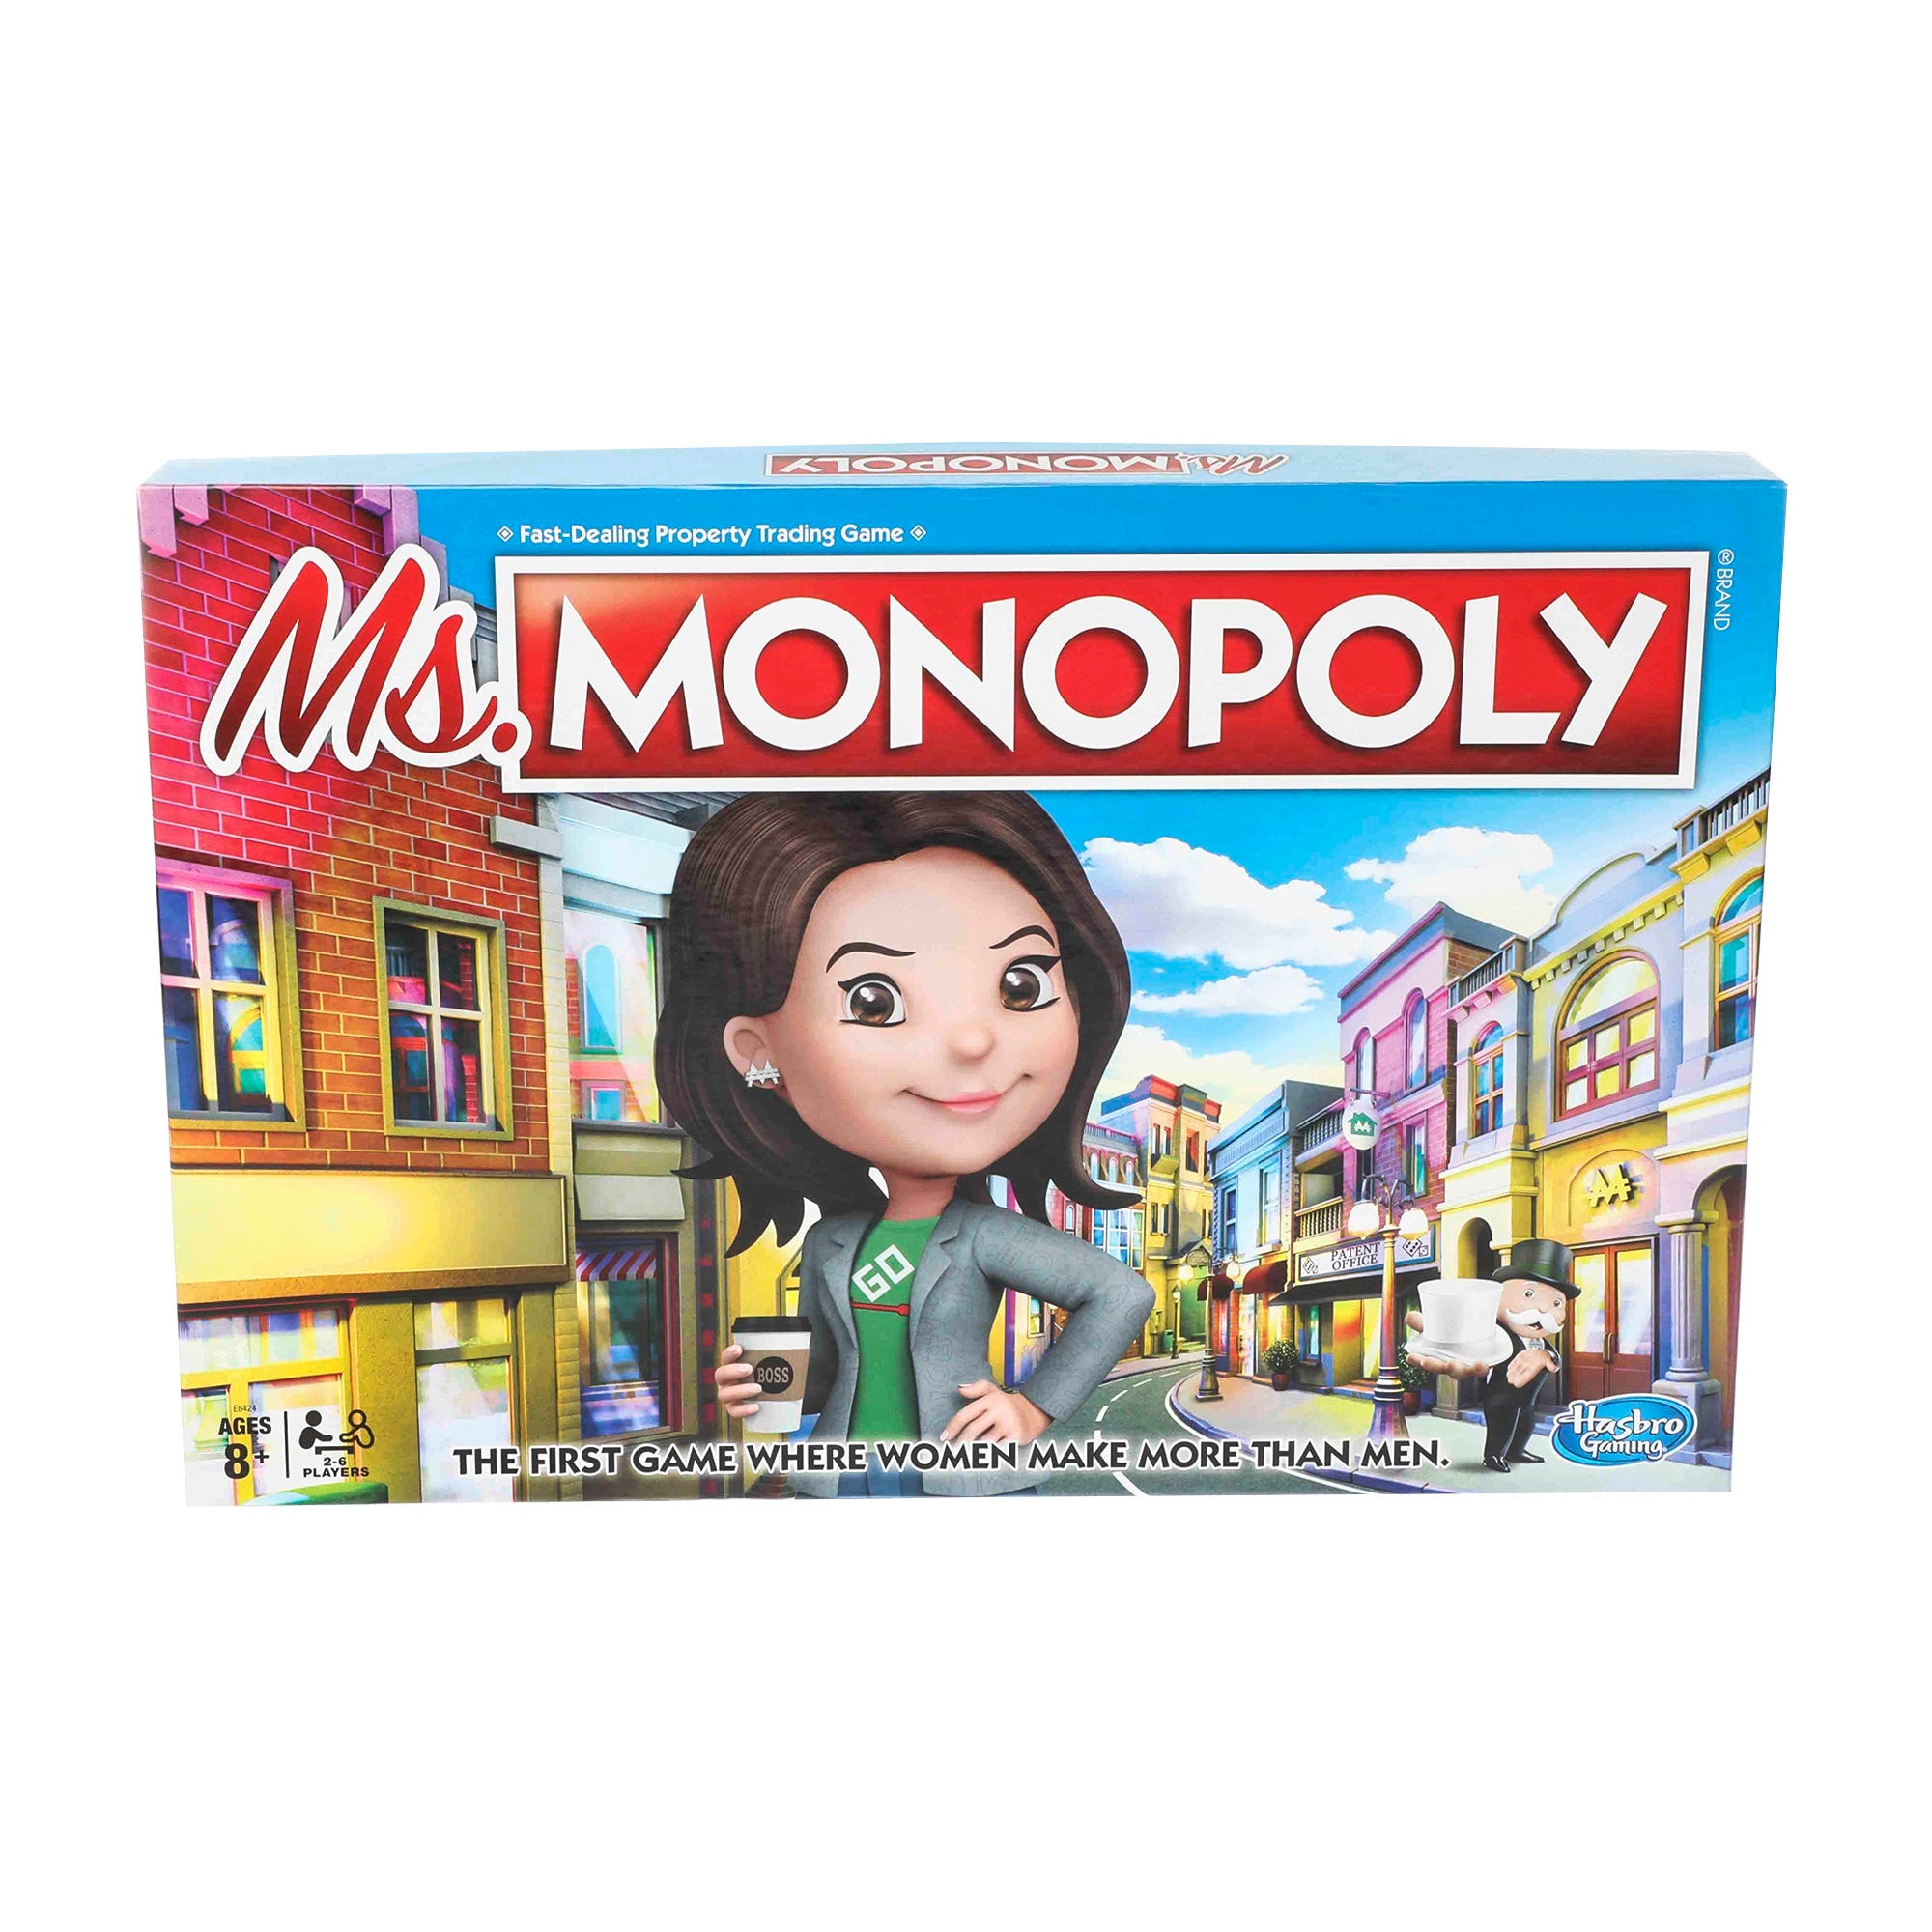 ms monopoly snopes